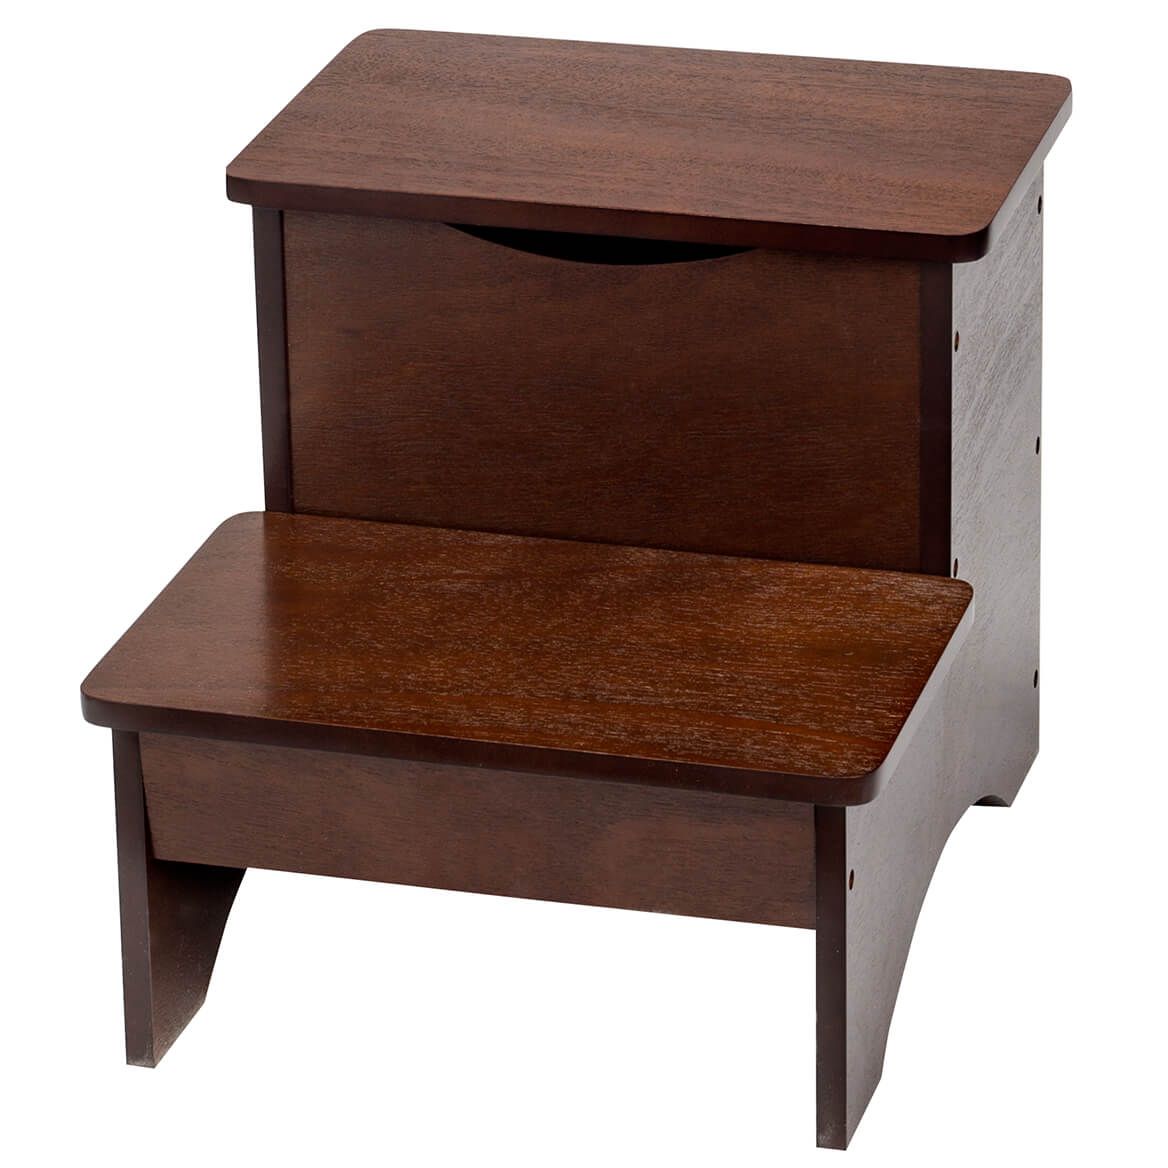 Wooden Step Stool with Storage by OakRidge™ + '-' + 359670